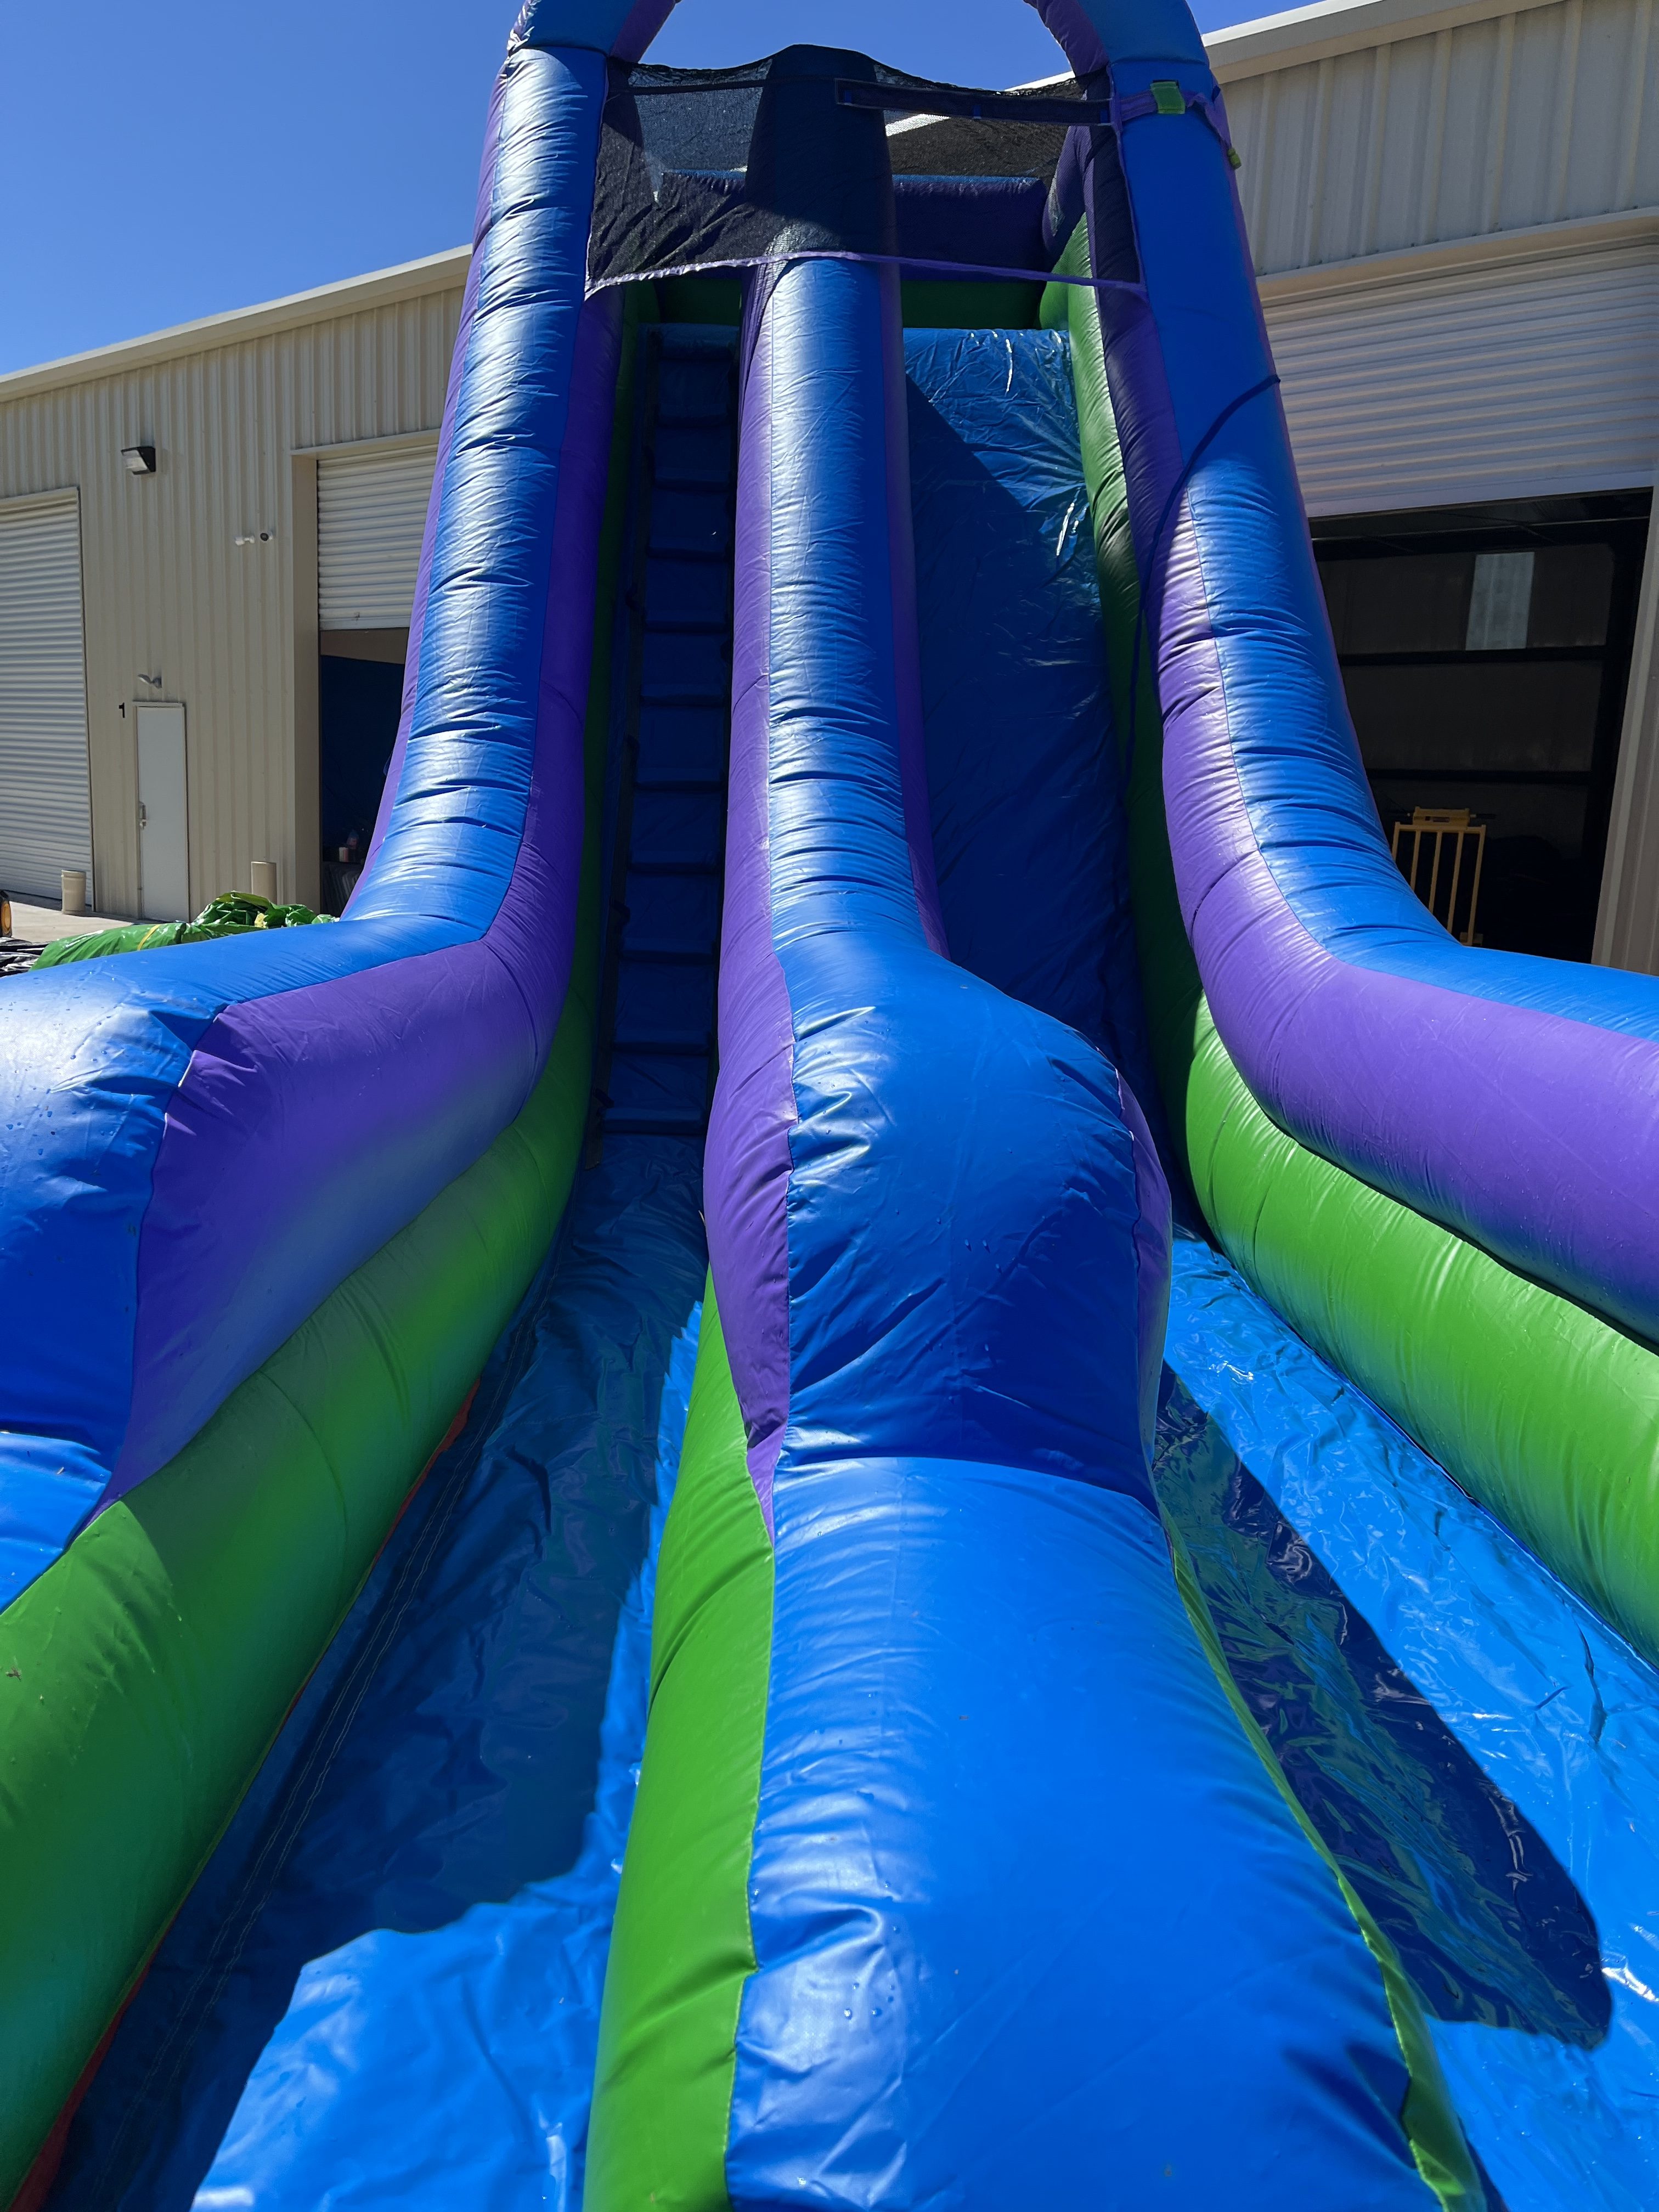 Free shipping!18'H Bubble Bump Slide Wet n Dry(Green)-1001 for sale –  Tophopinflatables